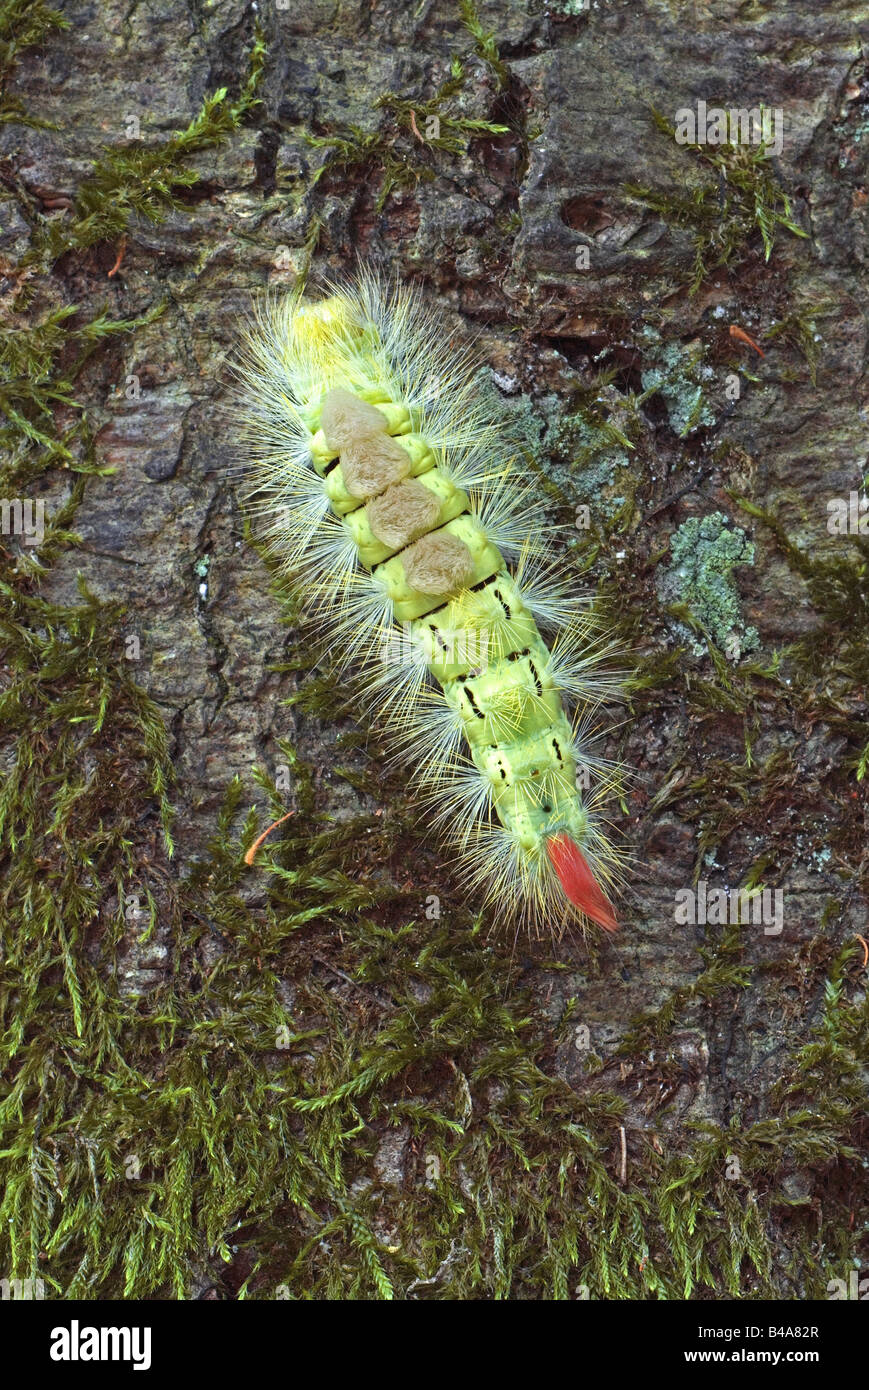 zoology / animals, insect, butterflies, Pale Tussock Moth, (Dasychira pudibunda), growth, caterpillar on bork, Nationalpark Jasmund Ruegen, Germany, distribution: Europe, Central Asia, Additional-Rights-Clearance-Info-Not-Available Stock Photo